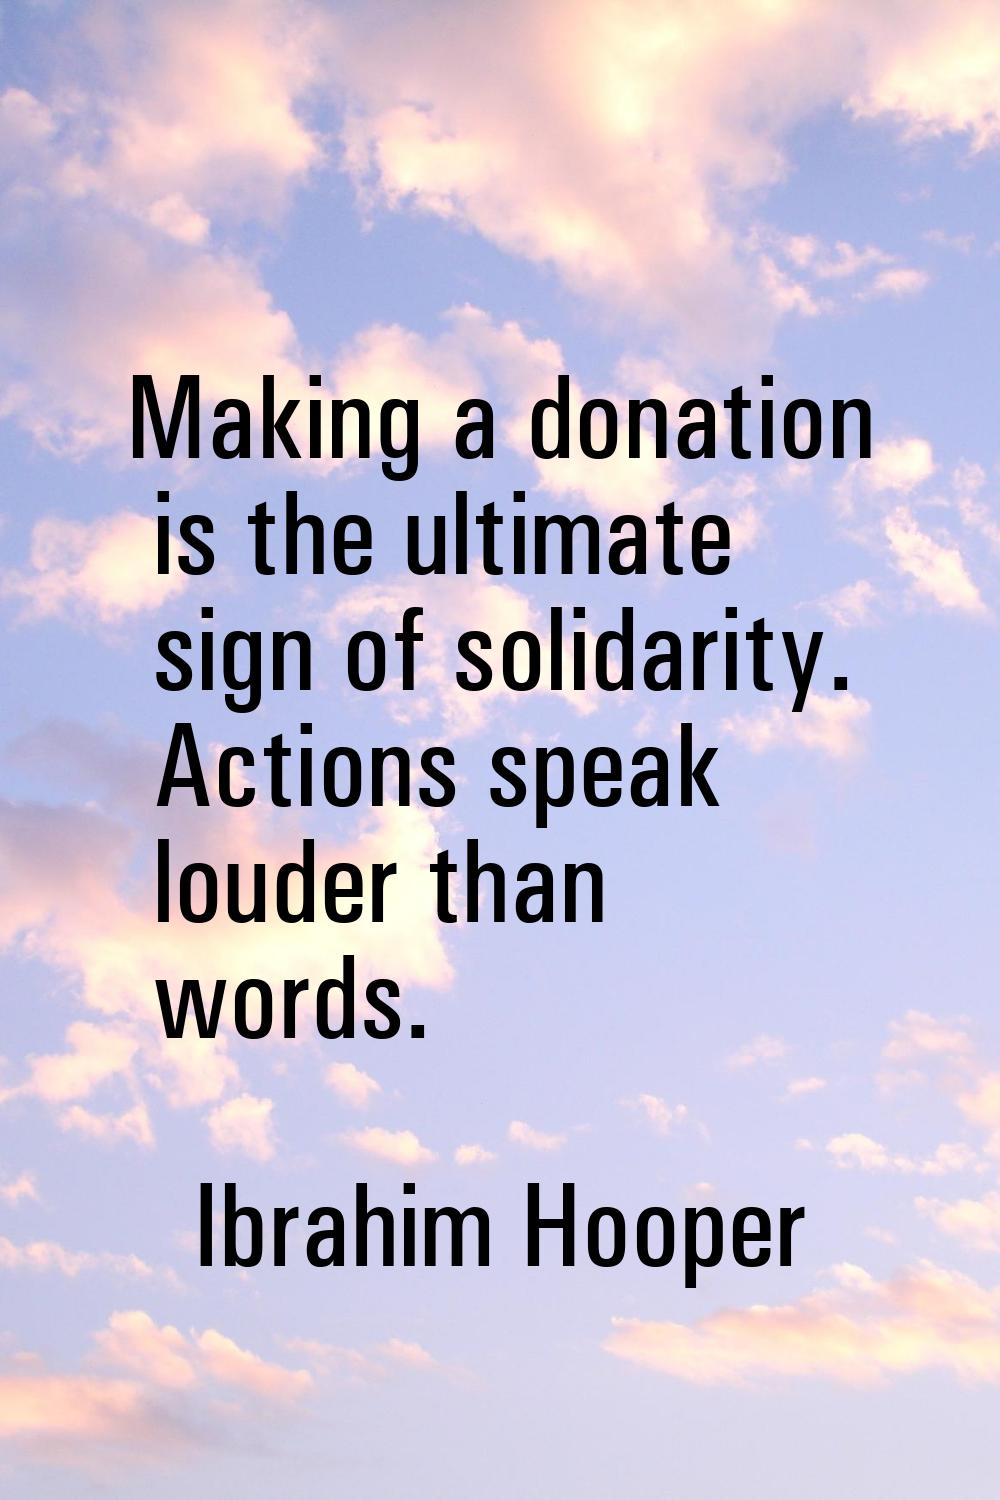 Making a donation is the ultimate sign of solidarity. Actions speak louder than words.